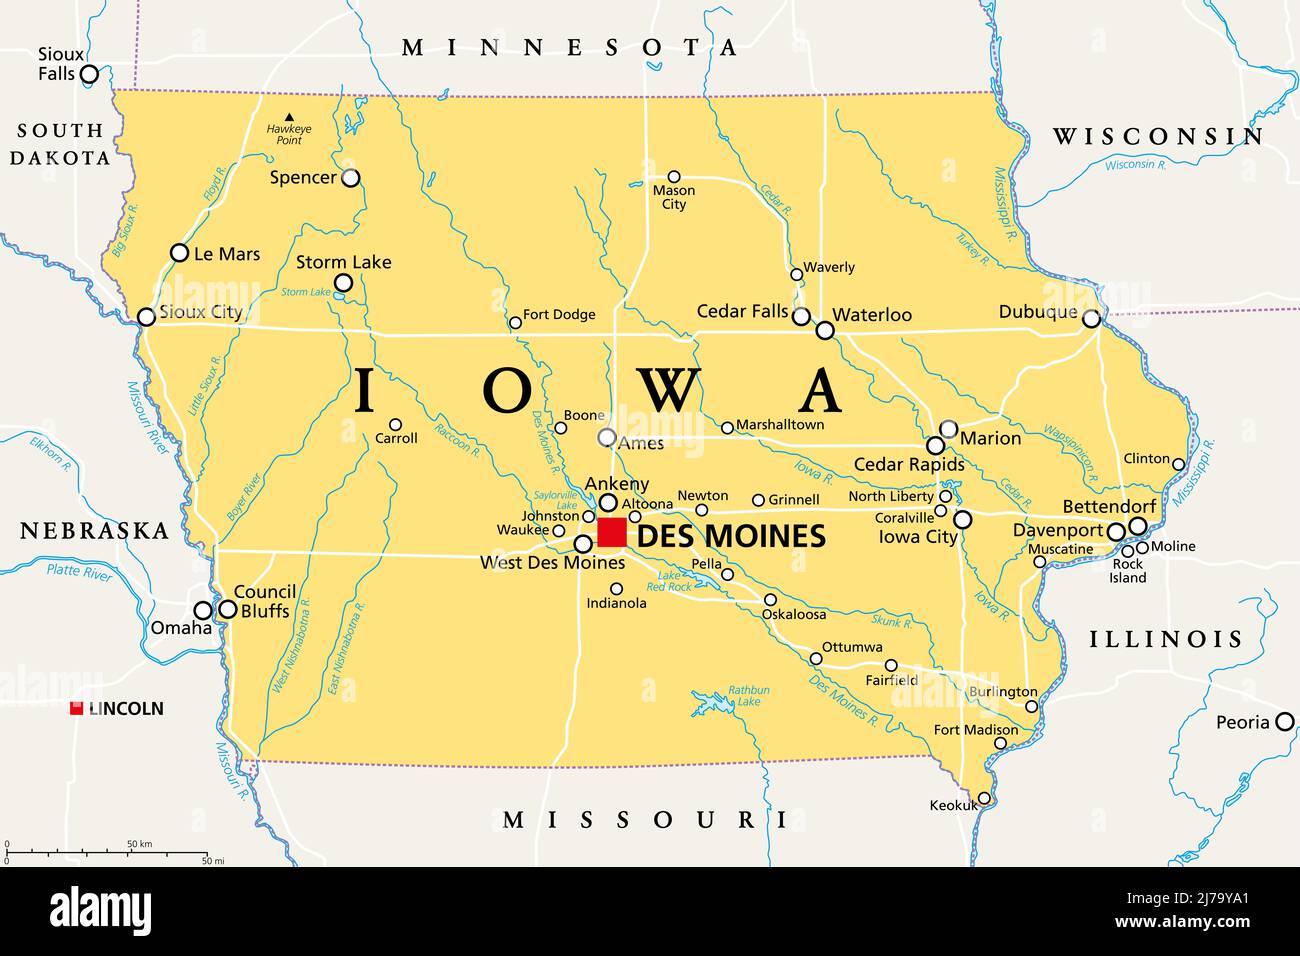 Iowa Ia Political Map With The Capital Des Moines And Most Important Cities Rivers And Lakes State In The Midwestern Region Of The United States 2J79YA1 